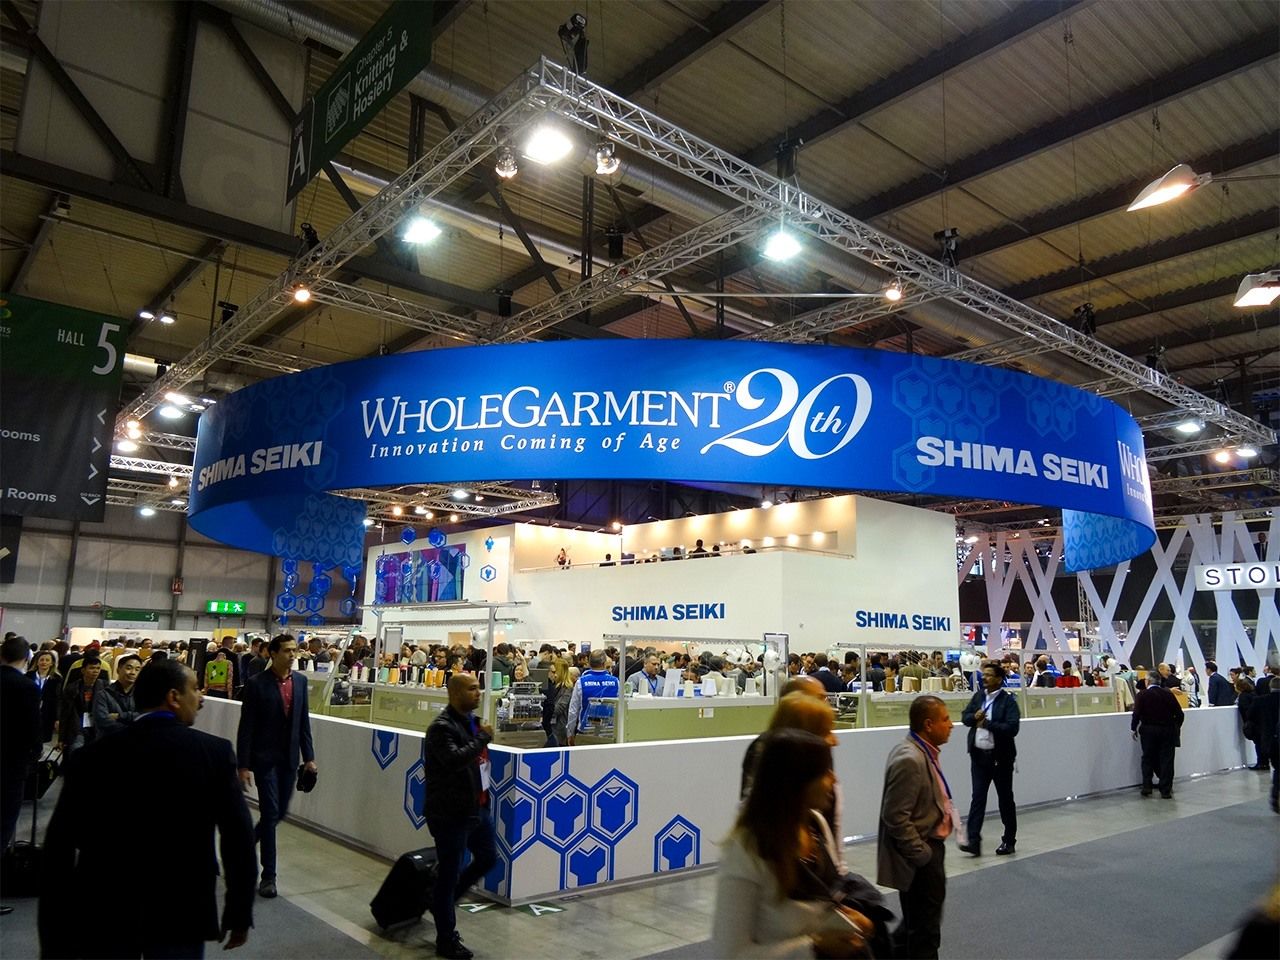 This booth at a 2015 industry expo in Milan marked 20 years since the Wholegarment machine was released. (Photo provided by Shima Seiki)